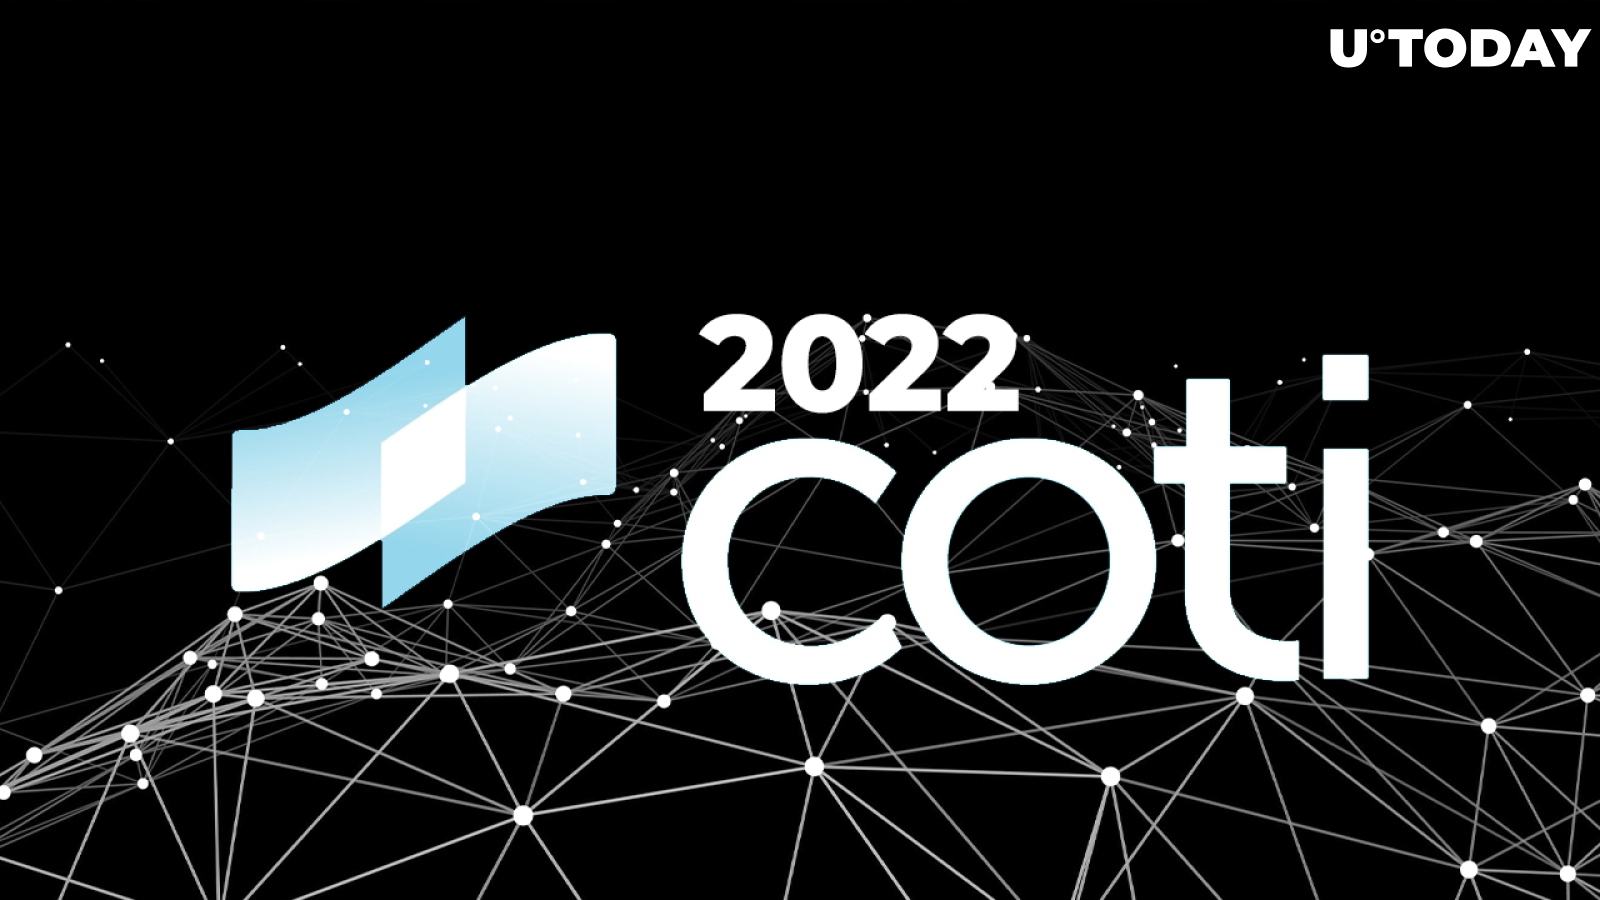 COTI Network Shares Details of its 2022 Roadmap: Infrastructure, Payments, What Else?